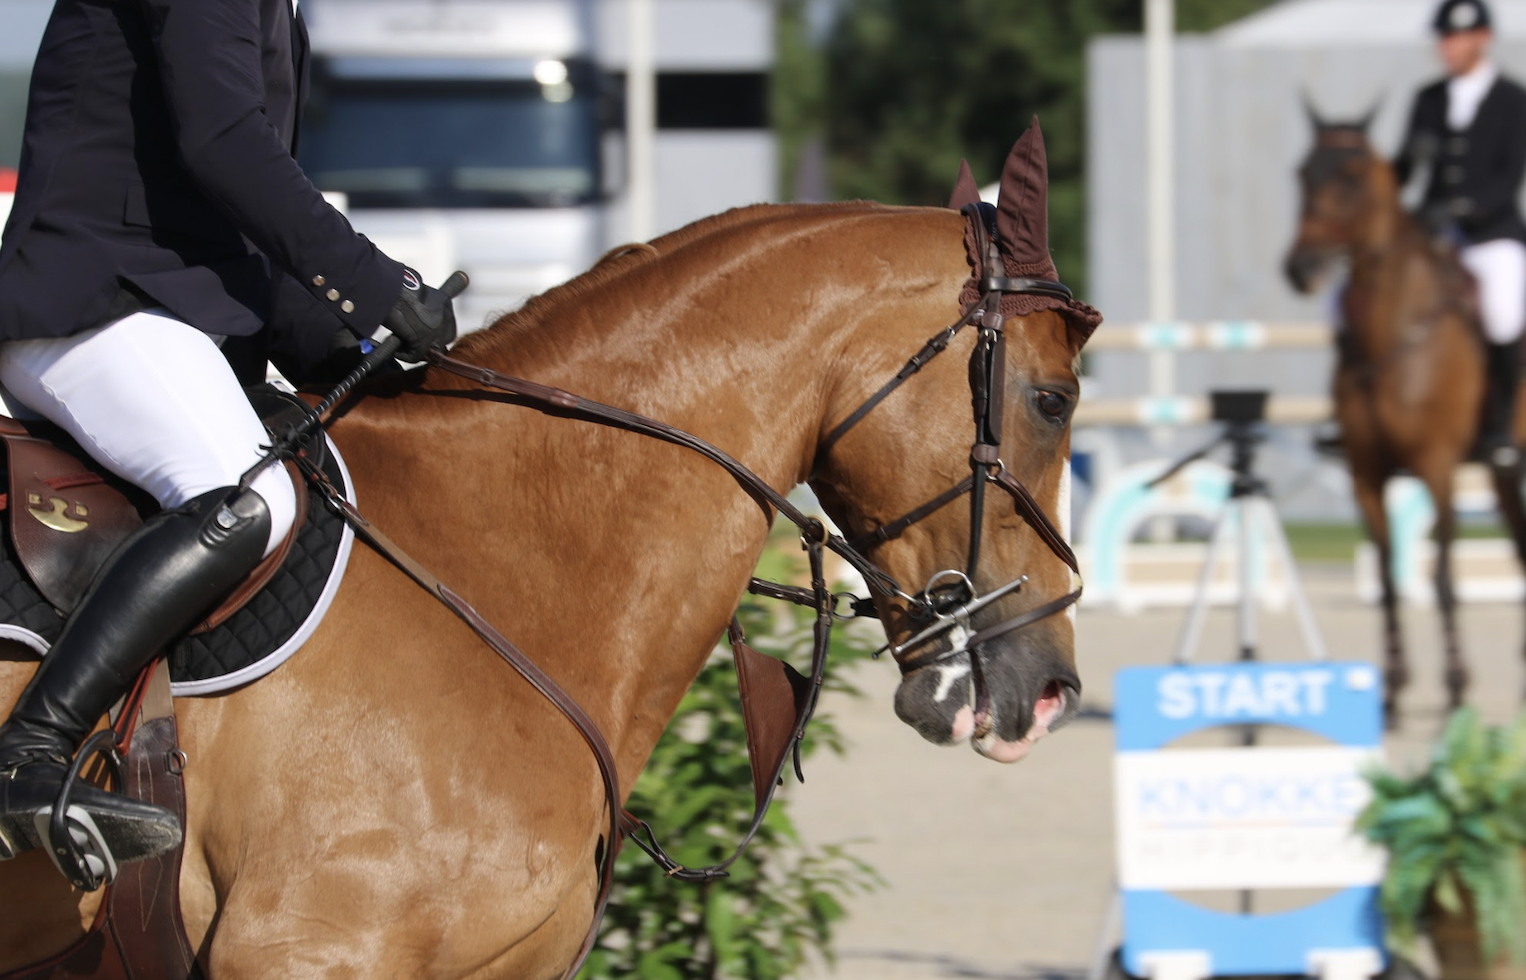 Fatal accident for Wayne Barr at New York horse shows